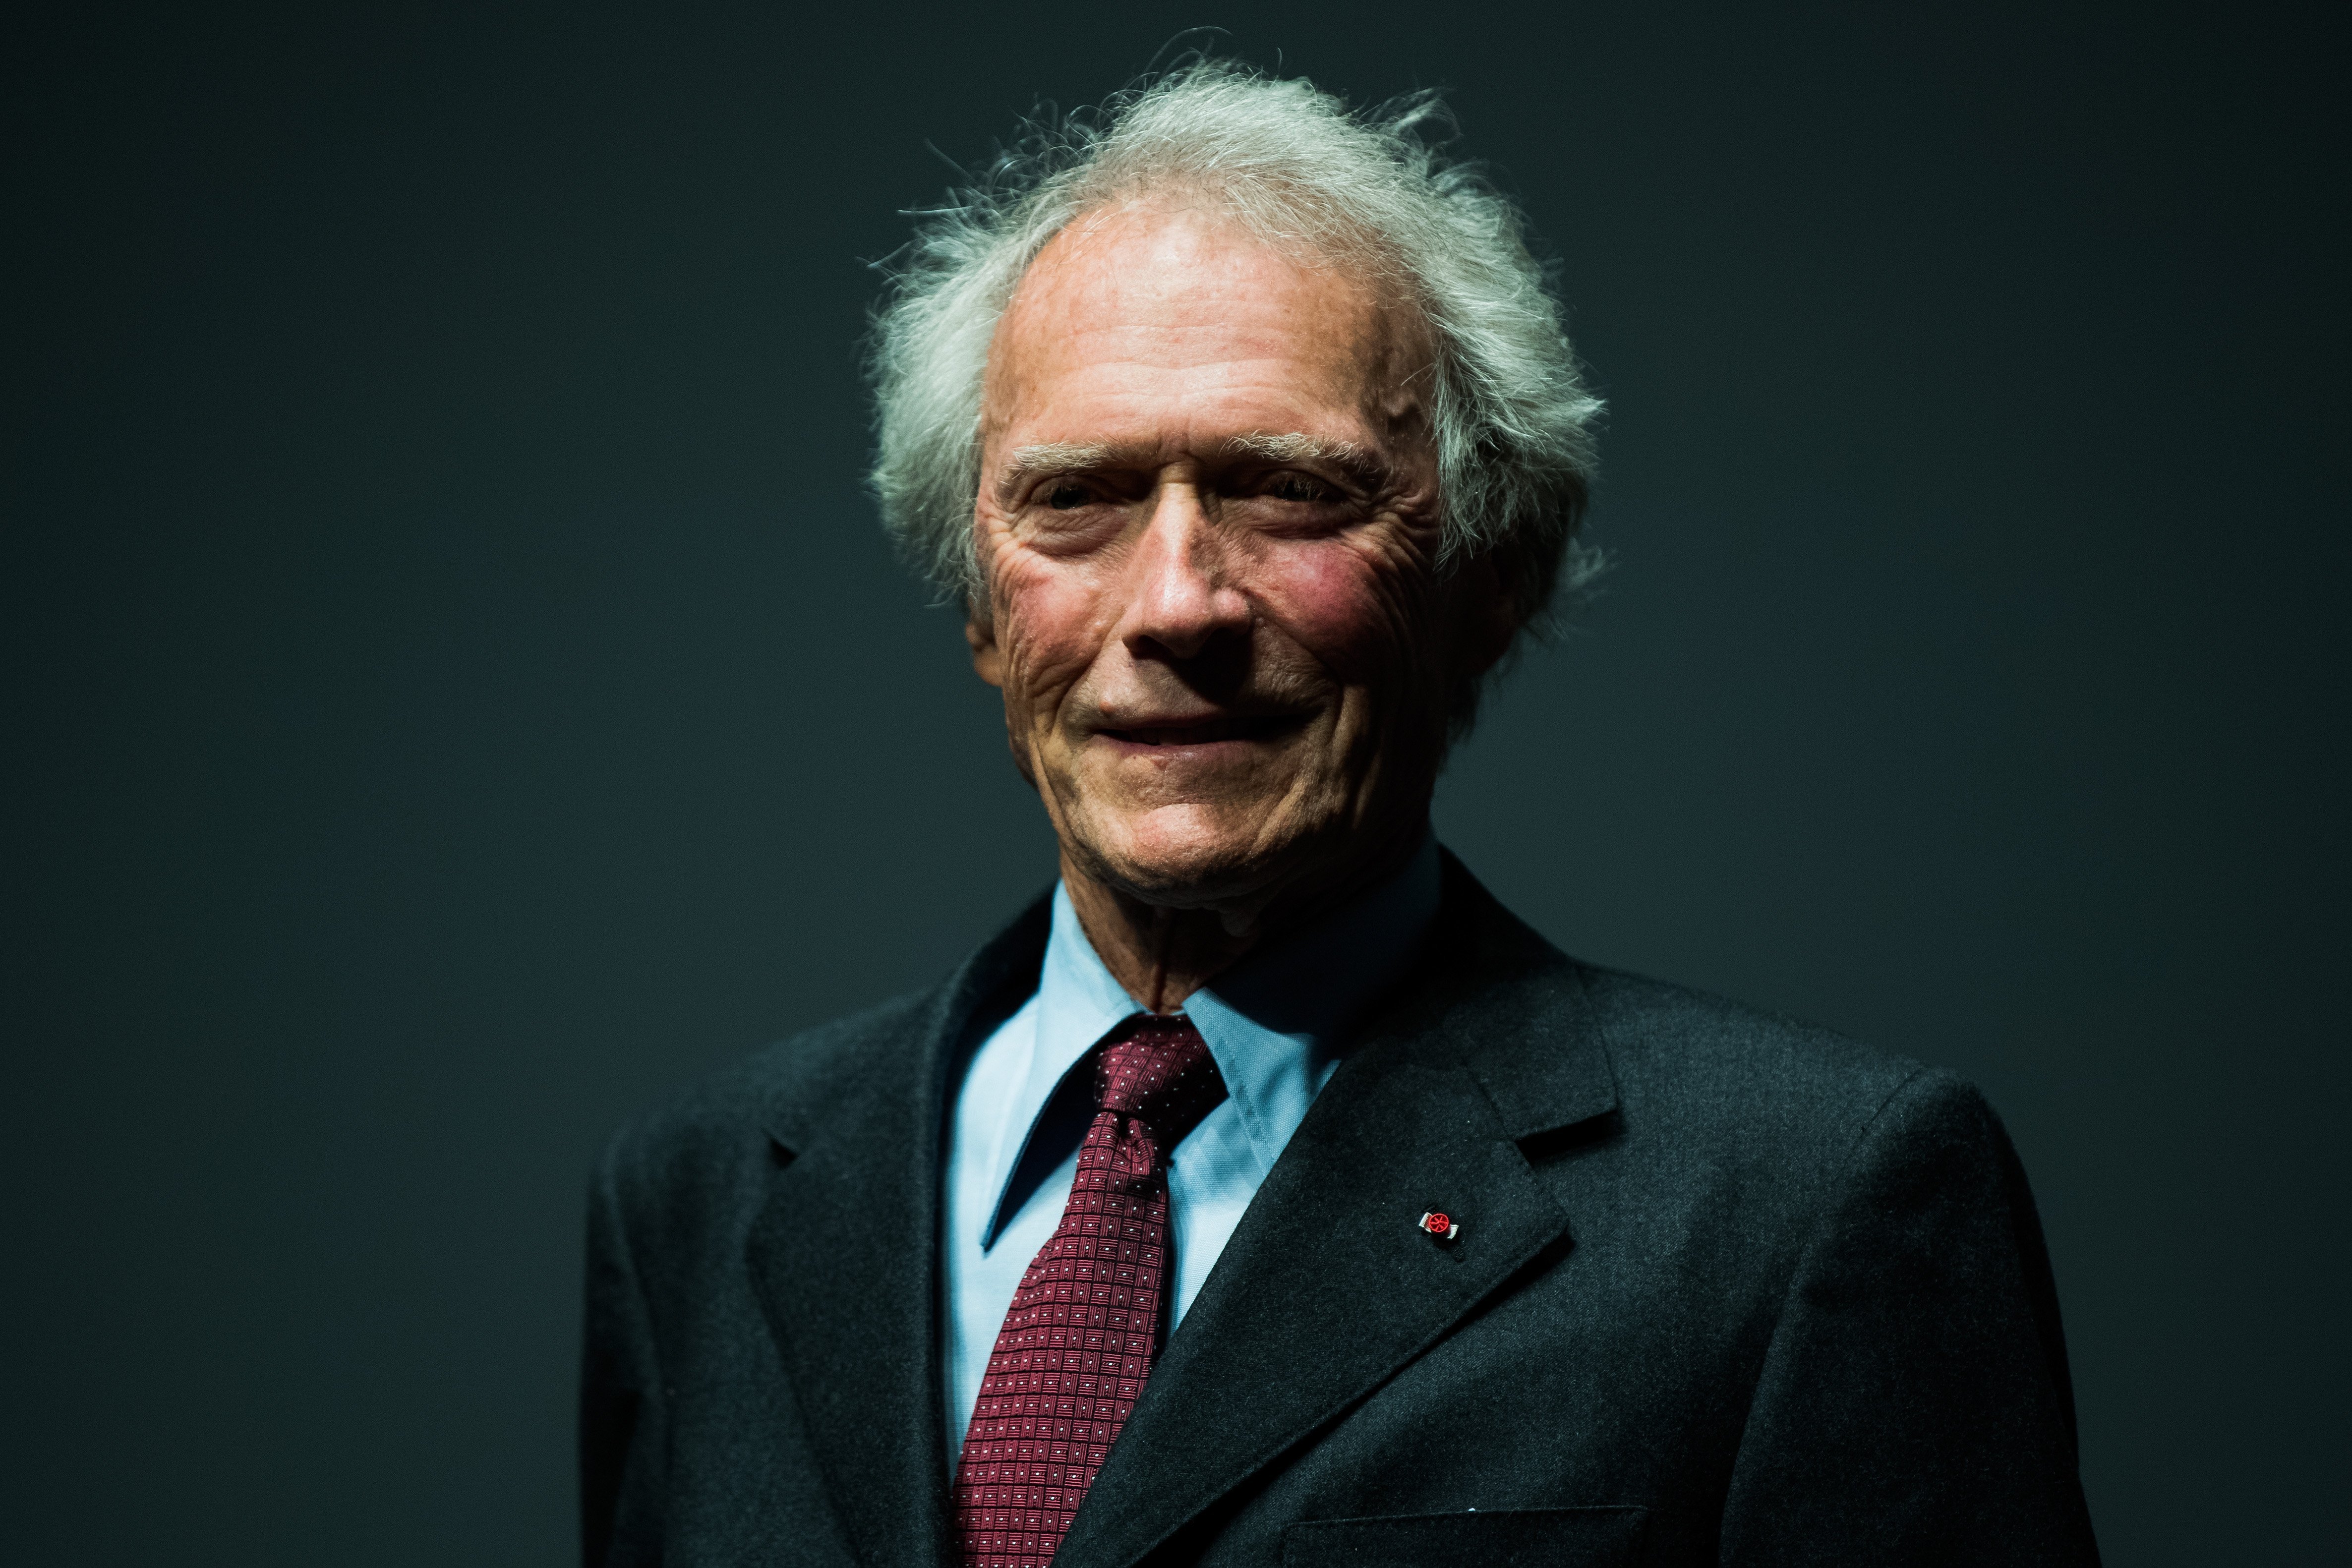 Clint Eastwood at the 70th annual Cannes Film Festival at Salle Debussy on May 20, 2017 | Photo: Getty Images